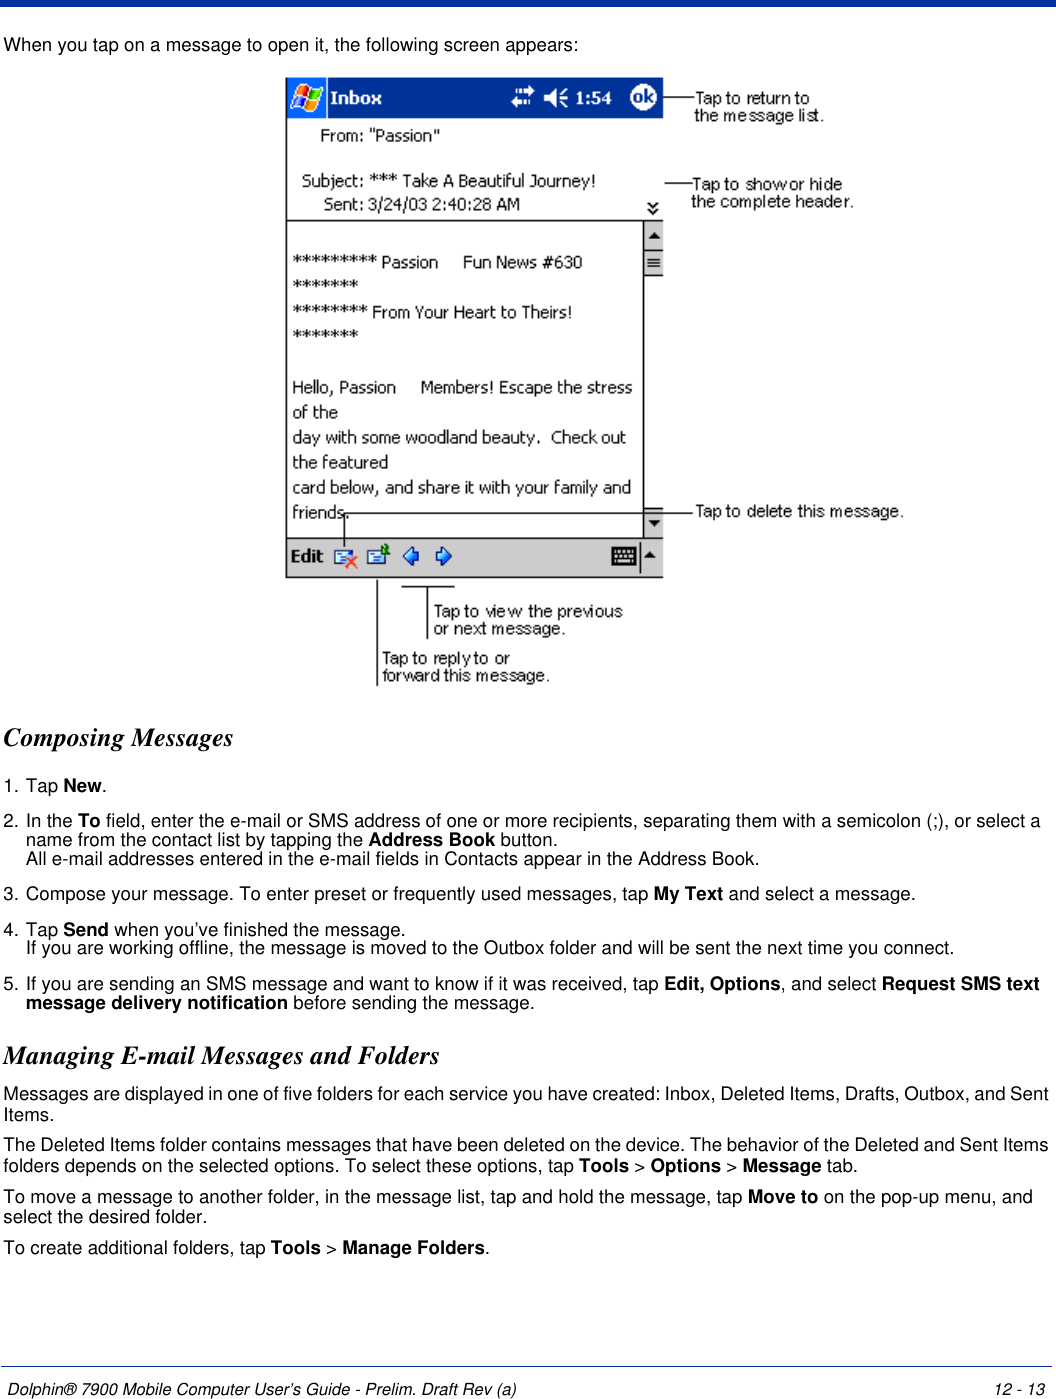 Dolphin® 7900 Mobile Computer User’s Guide - Prelim. Draft Rev (a) 12 - 13When you tap on a message to open it, the following screen appears: Composing Messages1. Tap New. 2. In the To field, enter the e-mail or SMS address of one or more recipients, separating them with a semicolon (;), or select a name from the contact list by tapping the Address Book button.  All e-mail addresses entered in the e-mail fields in Contacts appear in the Address Book.3. Compose your message. To enter preset or frequently used messages, tap My Text and select a message.4. Tap Send when you’ve finished the message.  If you are working offline, the message is moved to the Outbox folder and will be sent the next time you connect.5. If you are sending an SMS message and want to know if it was received, tap Edit, Options, and select Request SMS text message delivery notification before sending the message.Managing E-mail Messages and FoldersMessages are displayed in one of five folders for each service you have created: Inbox, Deleted Items, Drafts, Outbox, and Sent Items. The Deleted Items folder contains messages that have been deleted on the device. The behavior of the Deleted and Sent Items folders depends on the selected options. To select these options, tap Tools &gt; Options &gt; Message tab.To move a message to another folder, in the message list, tap and hold the message, tap Move to on the pop-up menu, and select the desired folder.To create additional folders, tap Tools &gt; Manage Folders. 